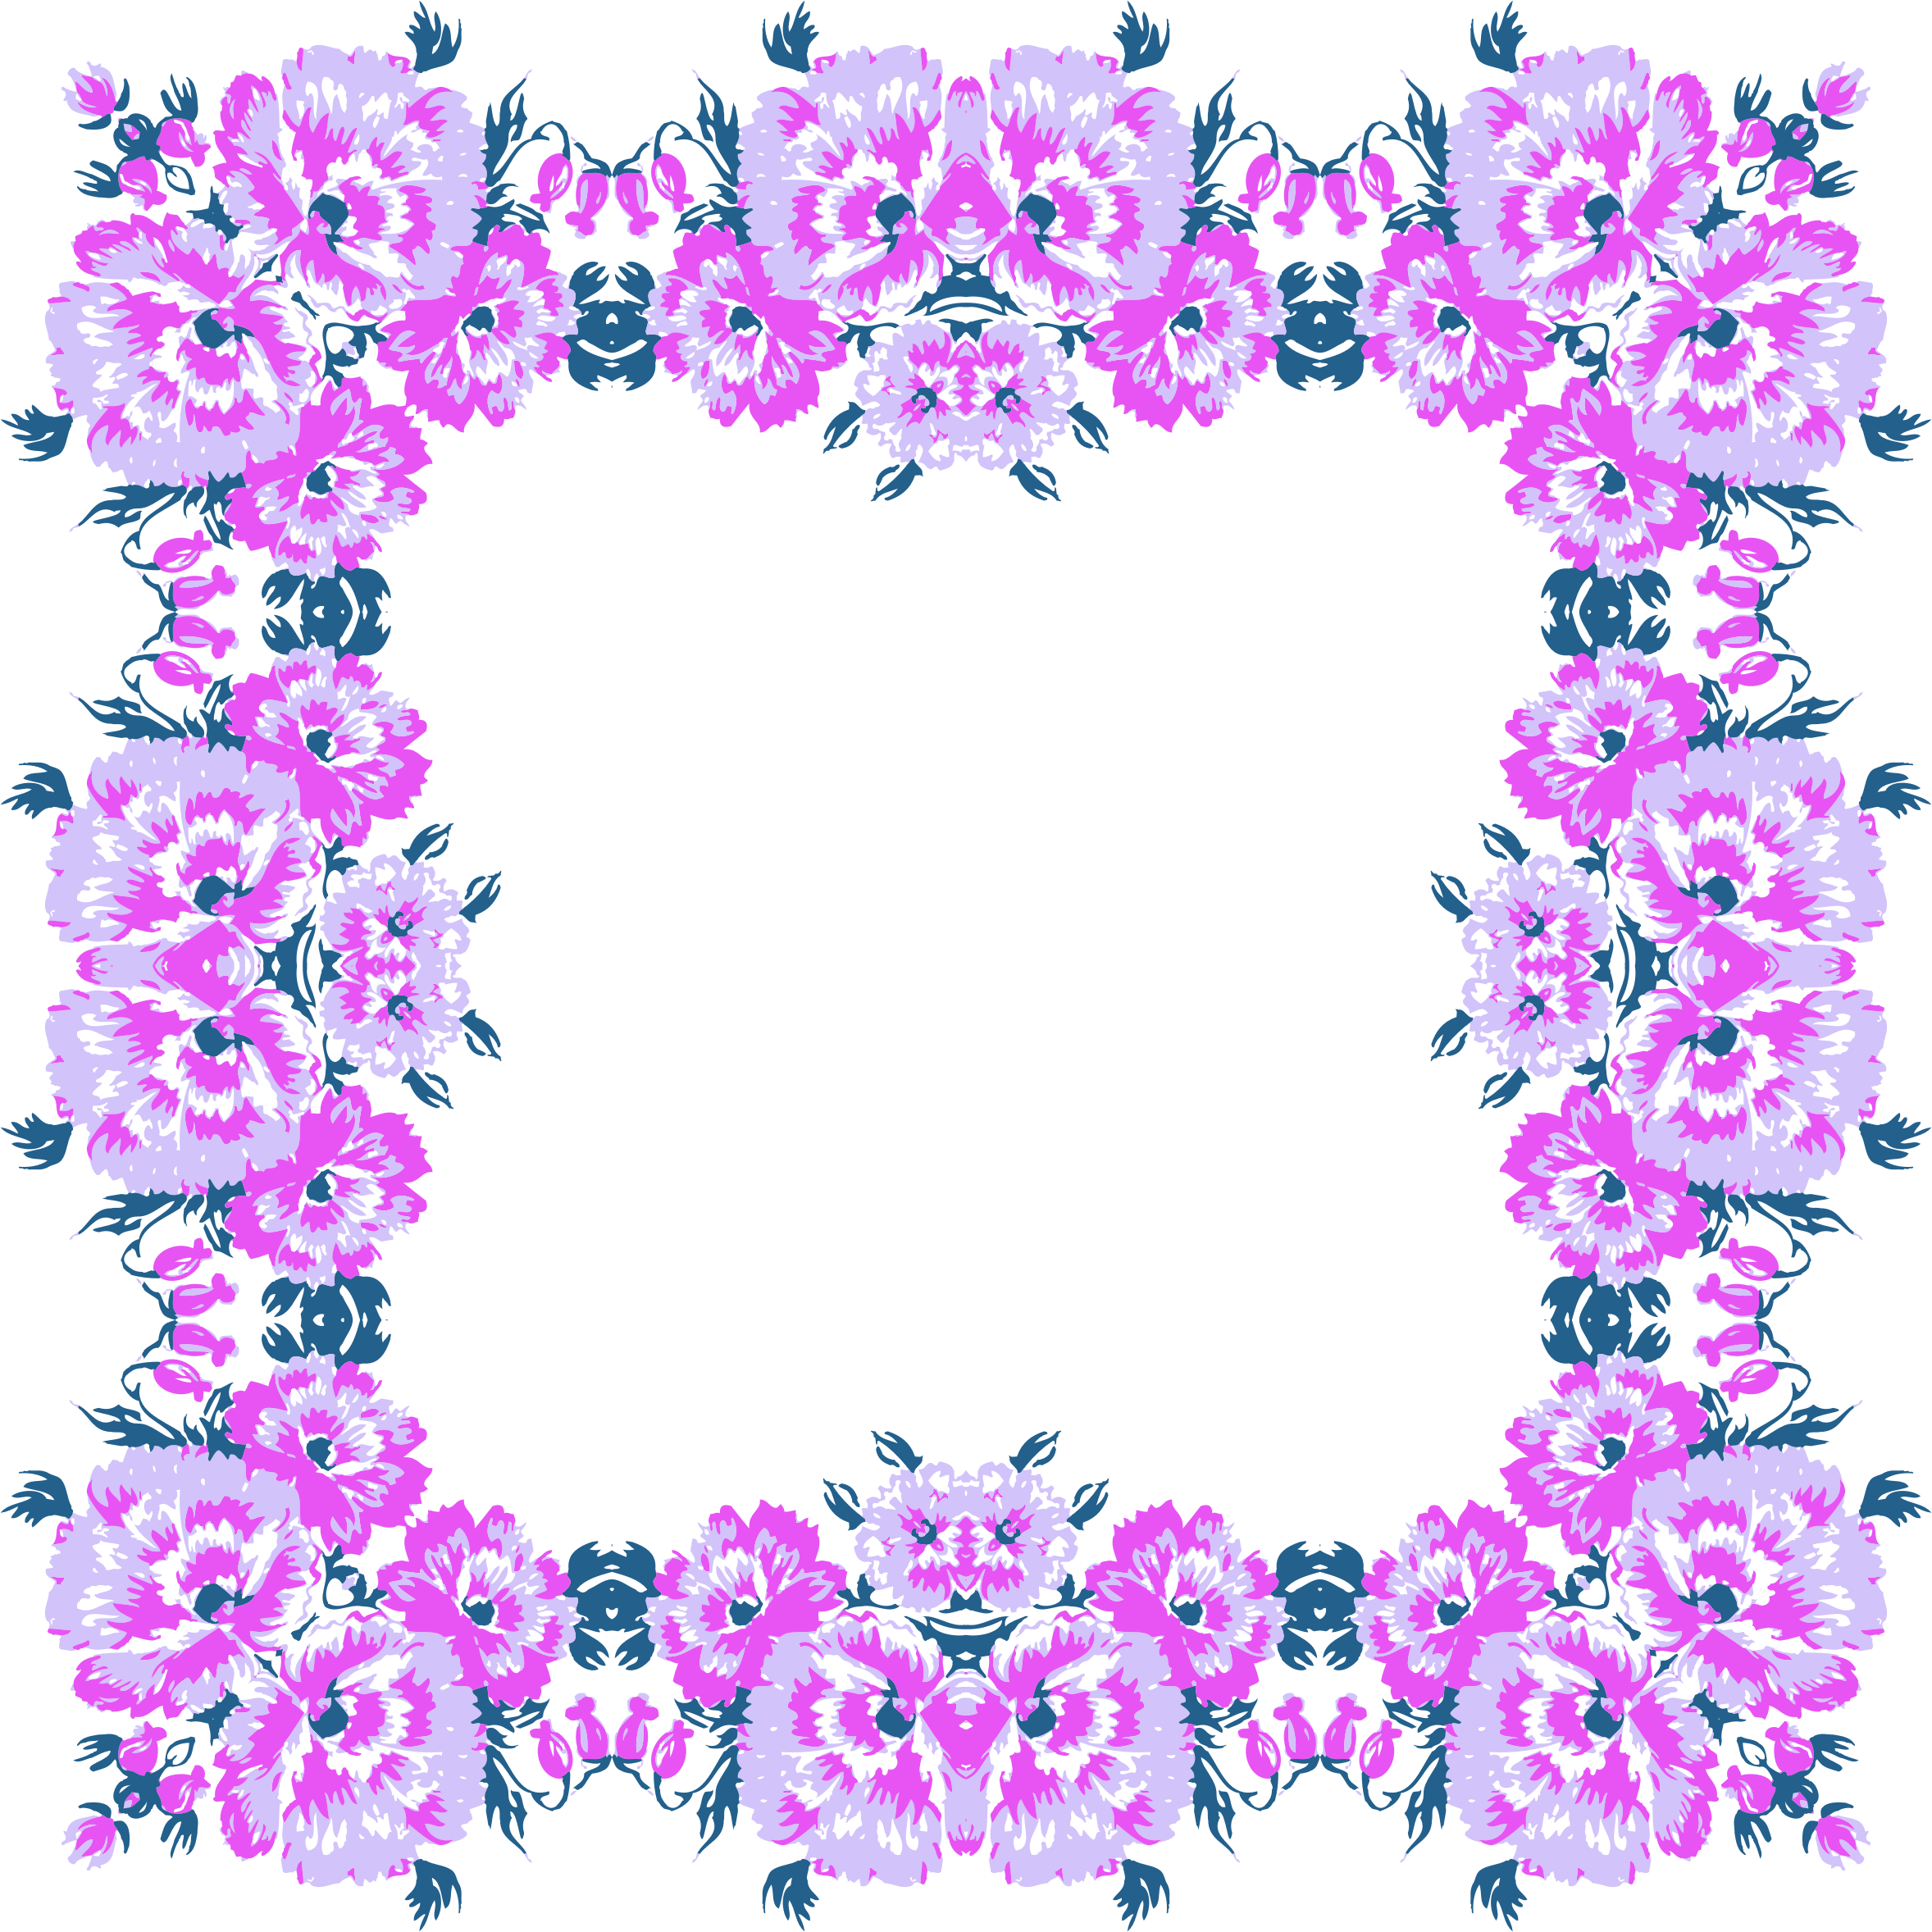 A Square Frame Of Pink And Purple Flowers